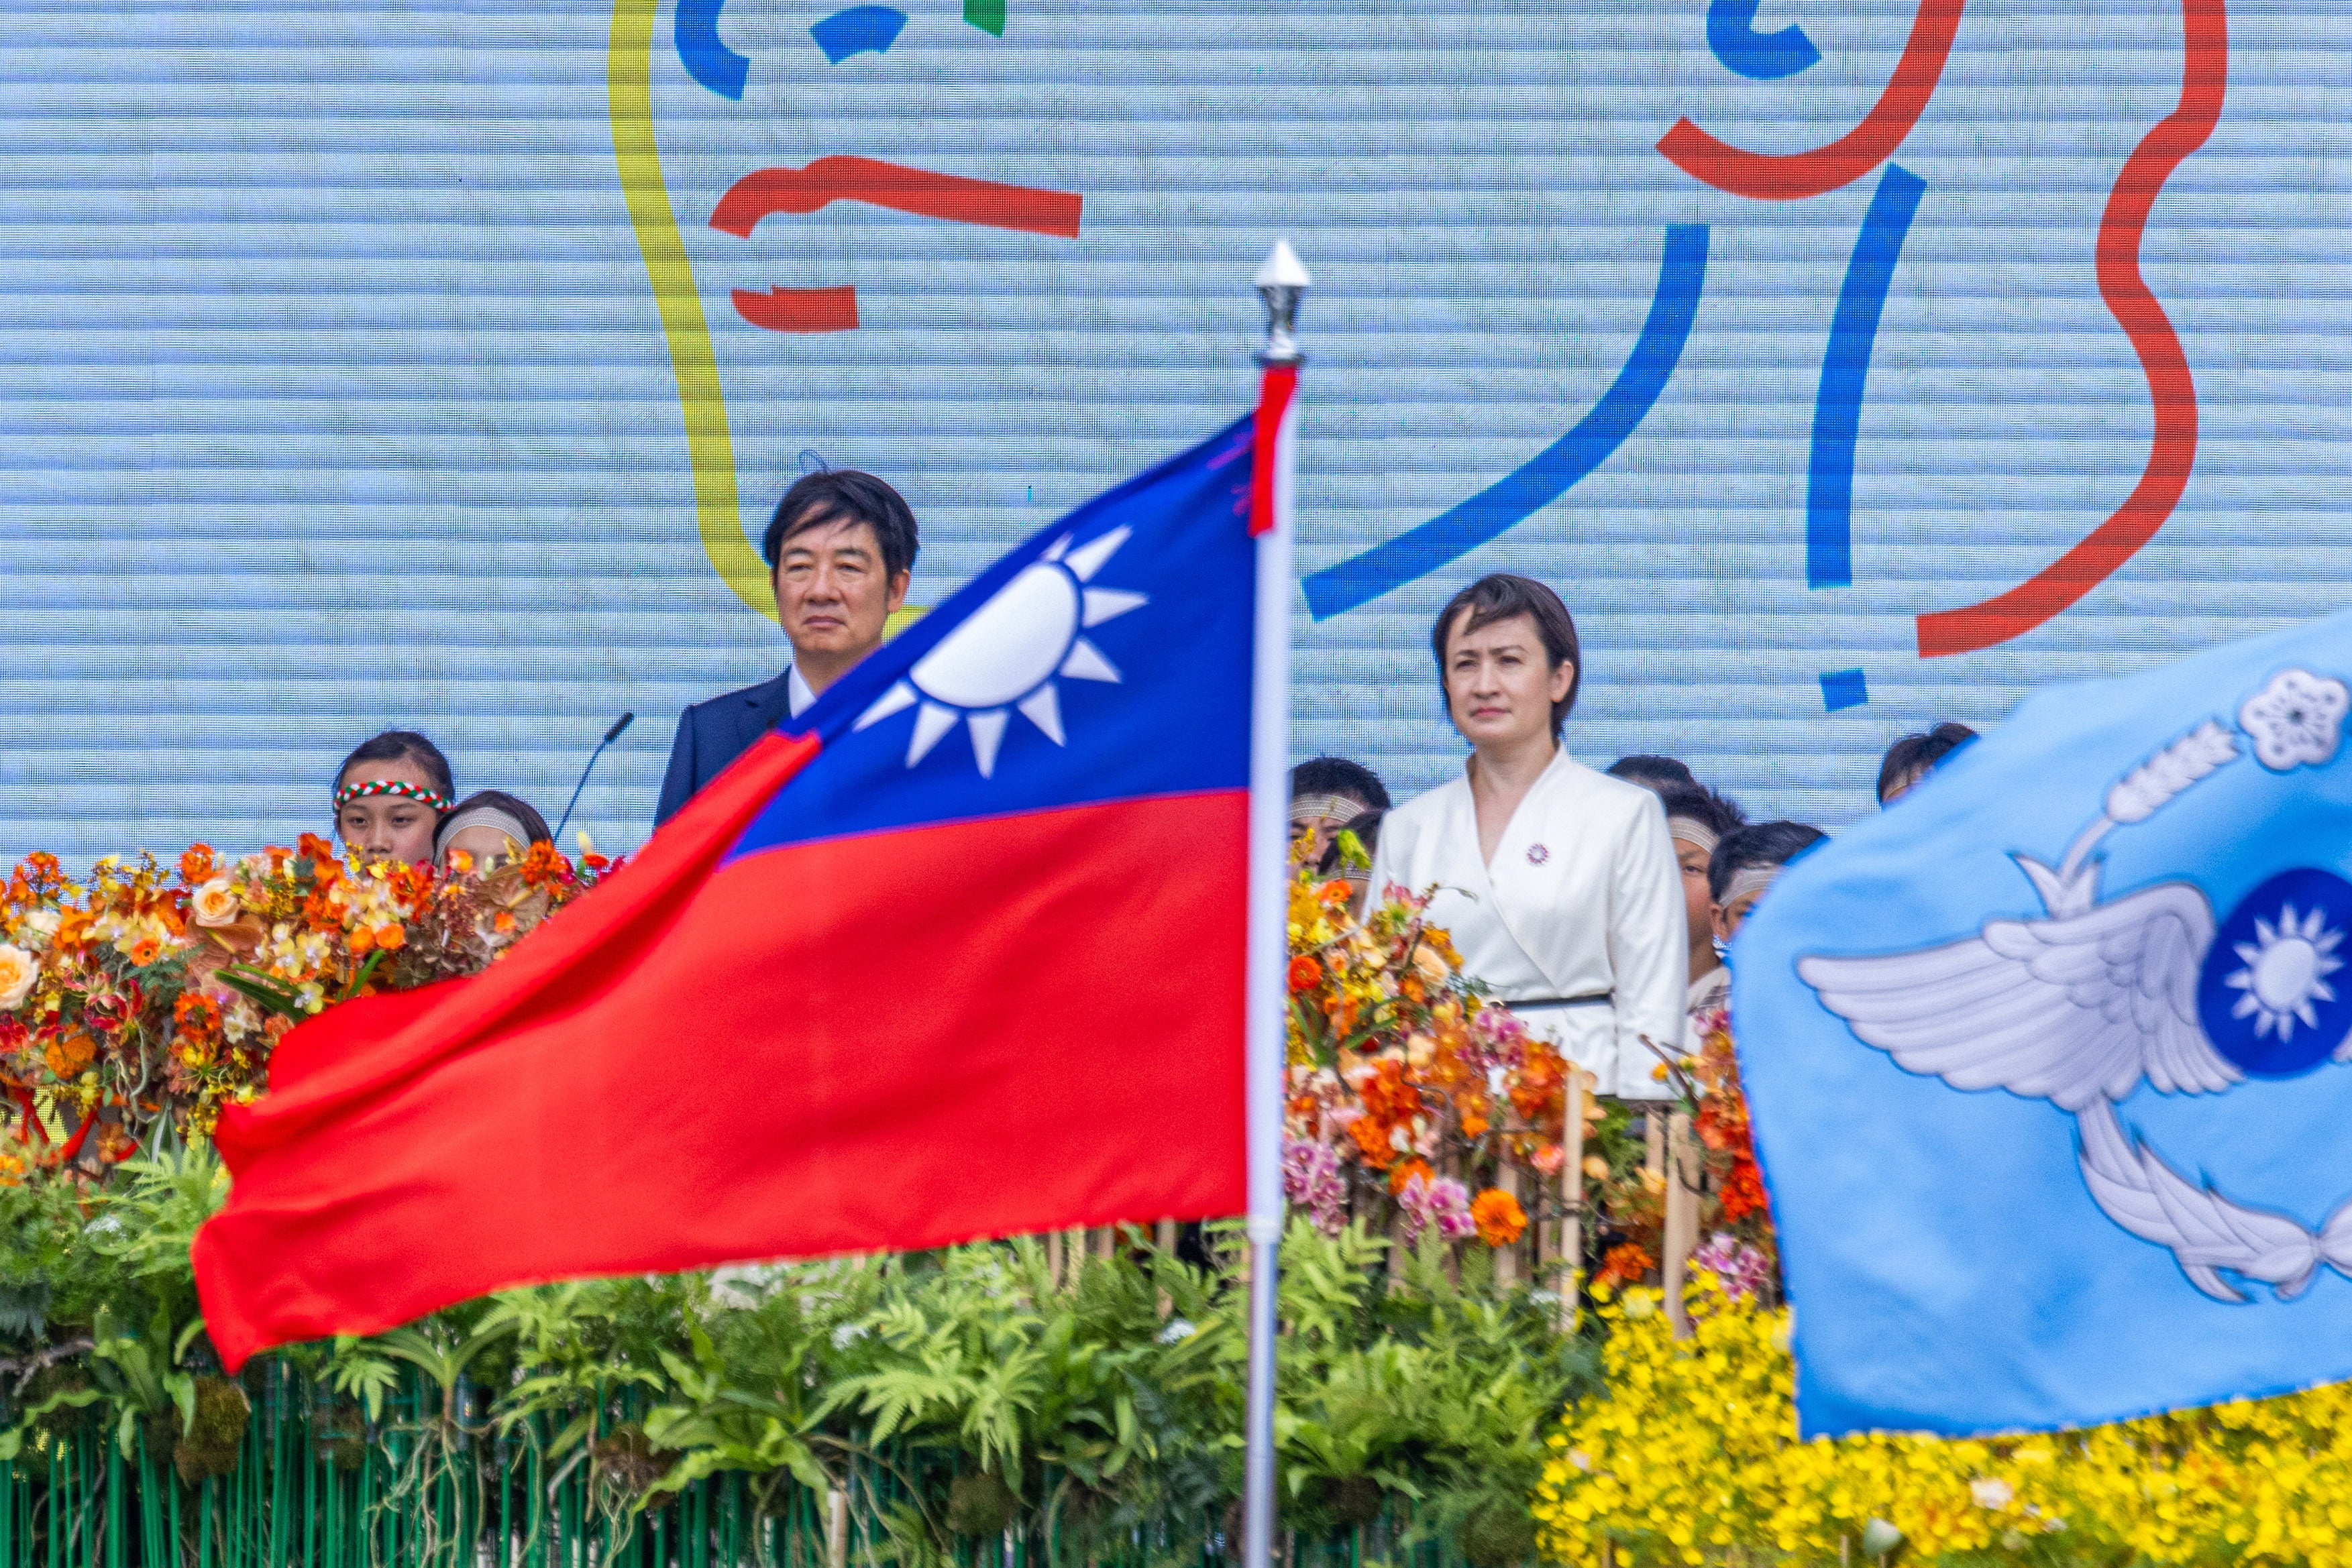 Taiwan's president Lai Ching-te and vice president Hsiao Bi-khim at their inauguration in Taipei on 20 May 2024